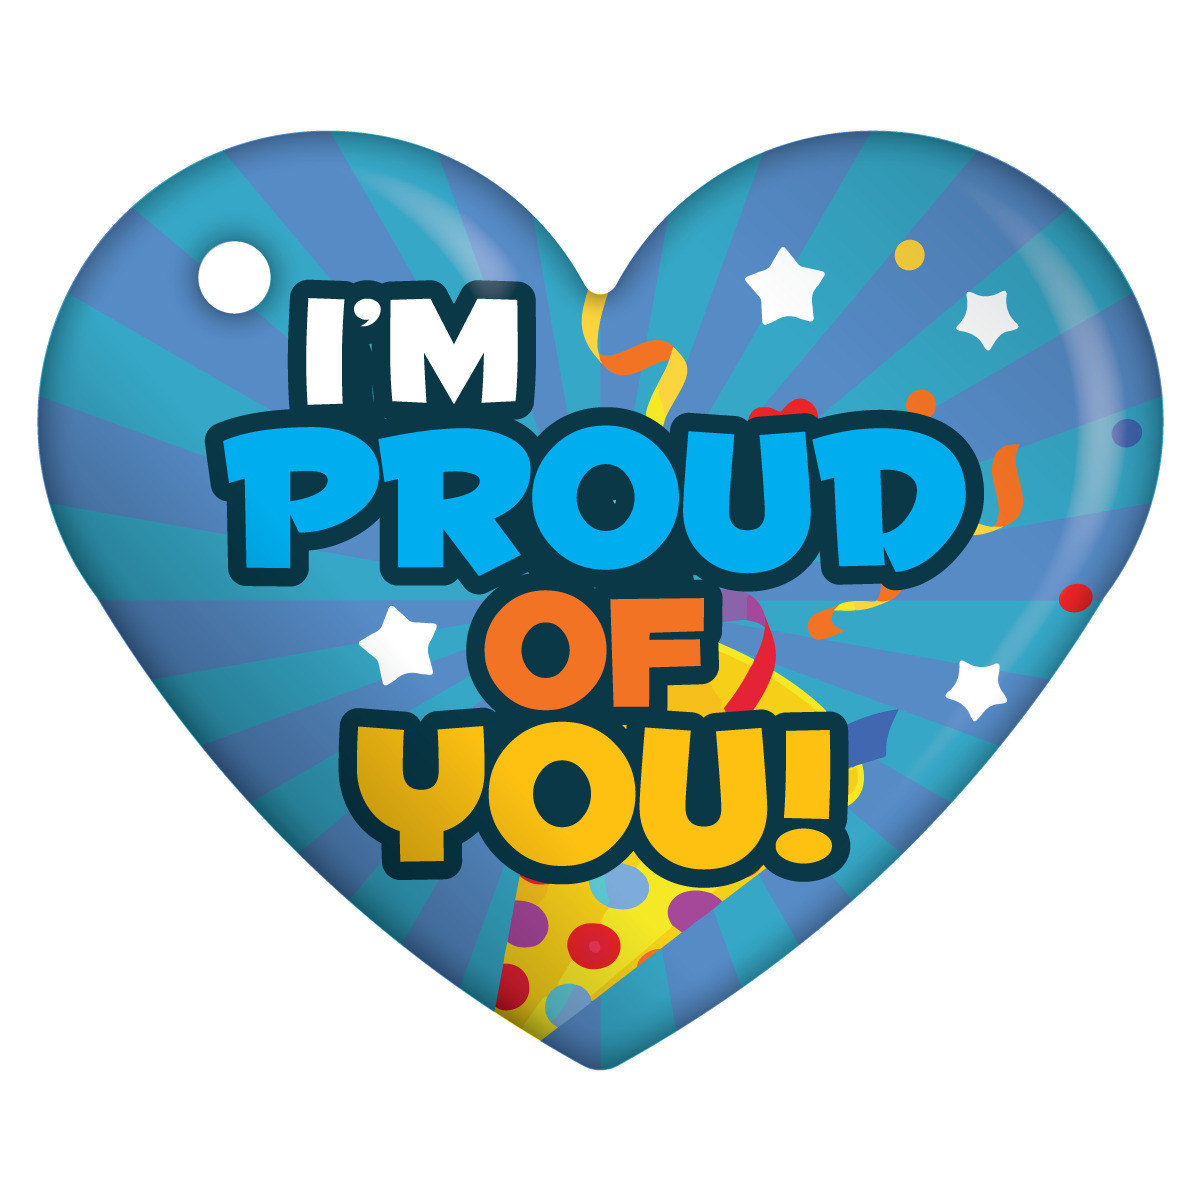 I M Proud Of You Heart Brag Tag